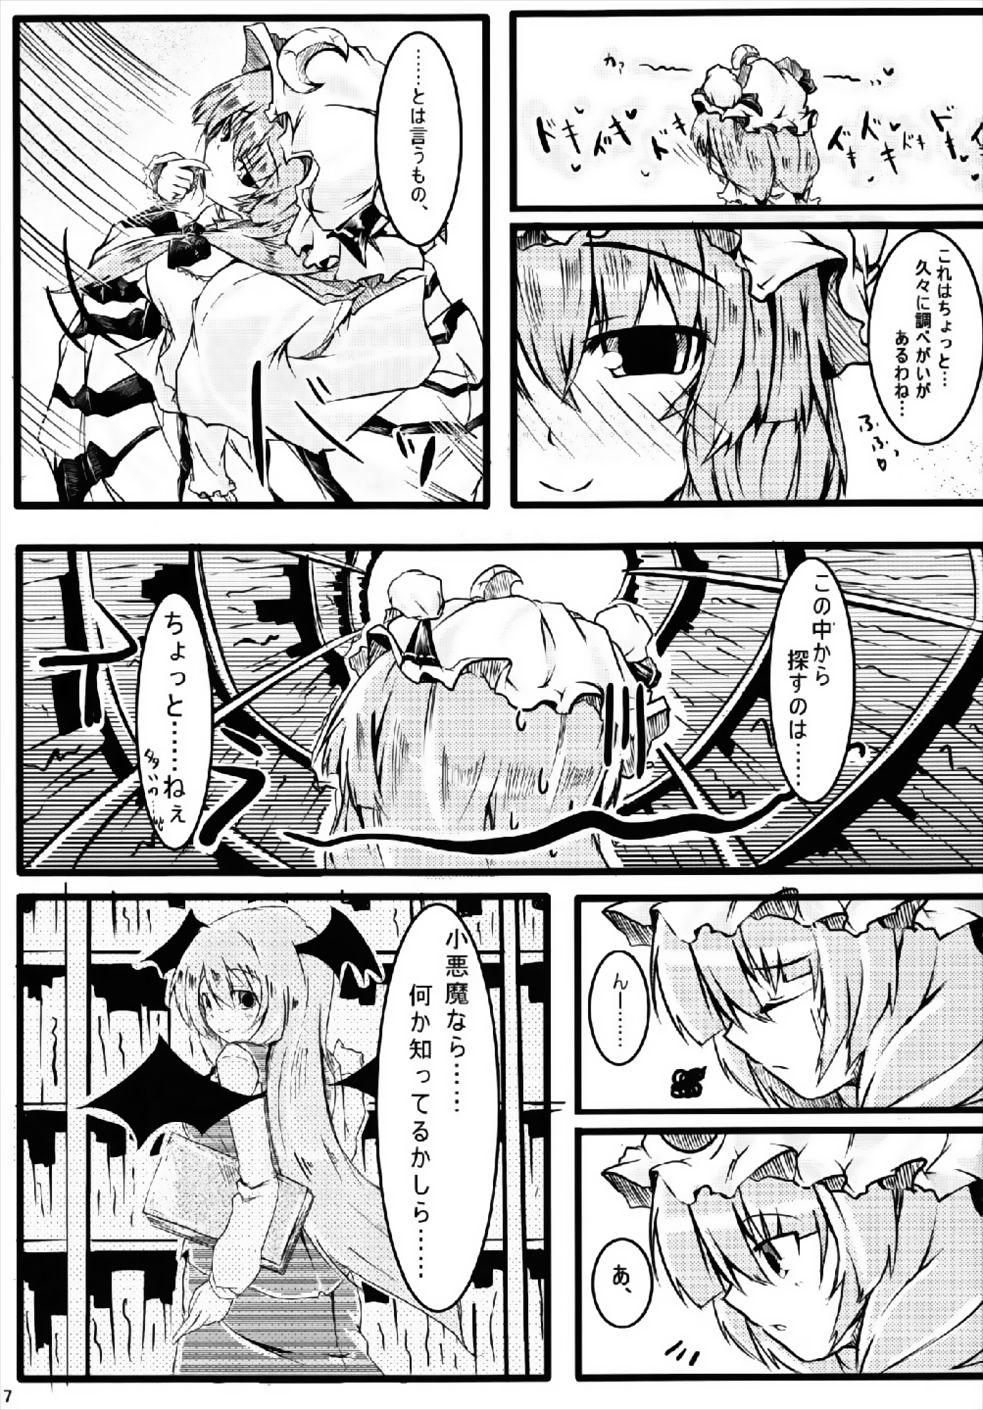 Lezdom RemiFlaPatche! - Touhou project Couple Fucking - Page 6